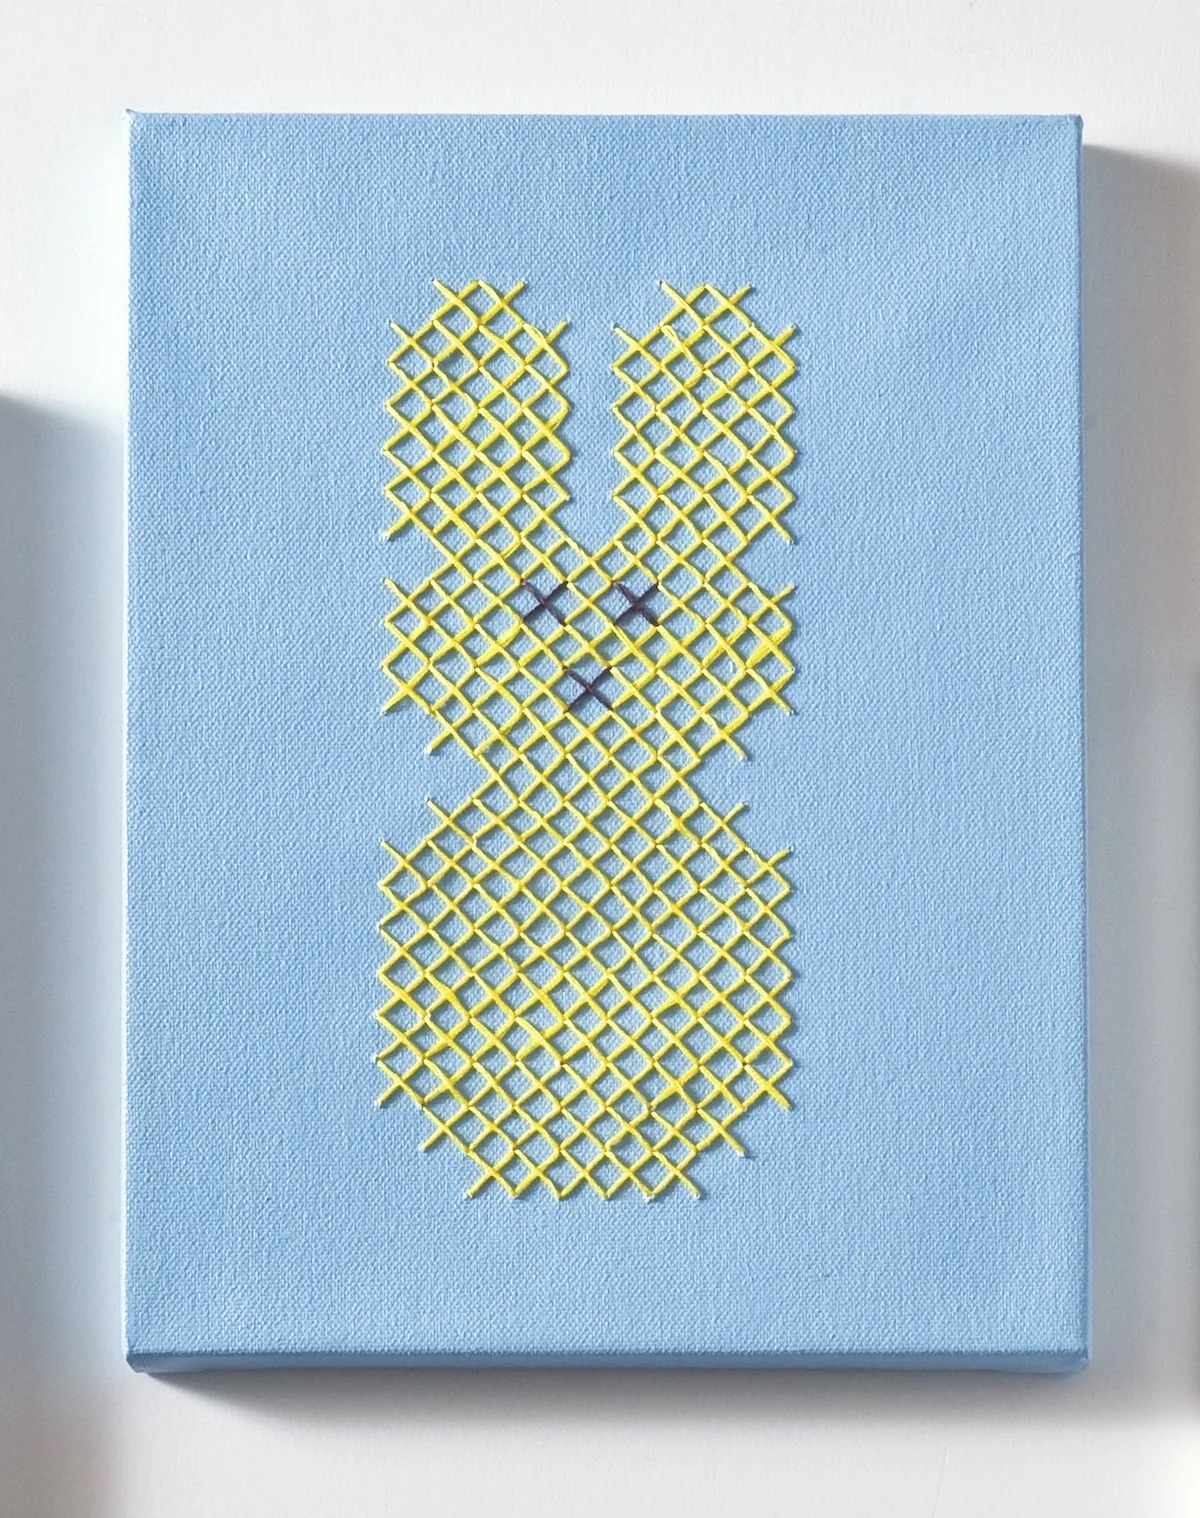 Blue Easter canvas with a yellow bunny Peep